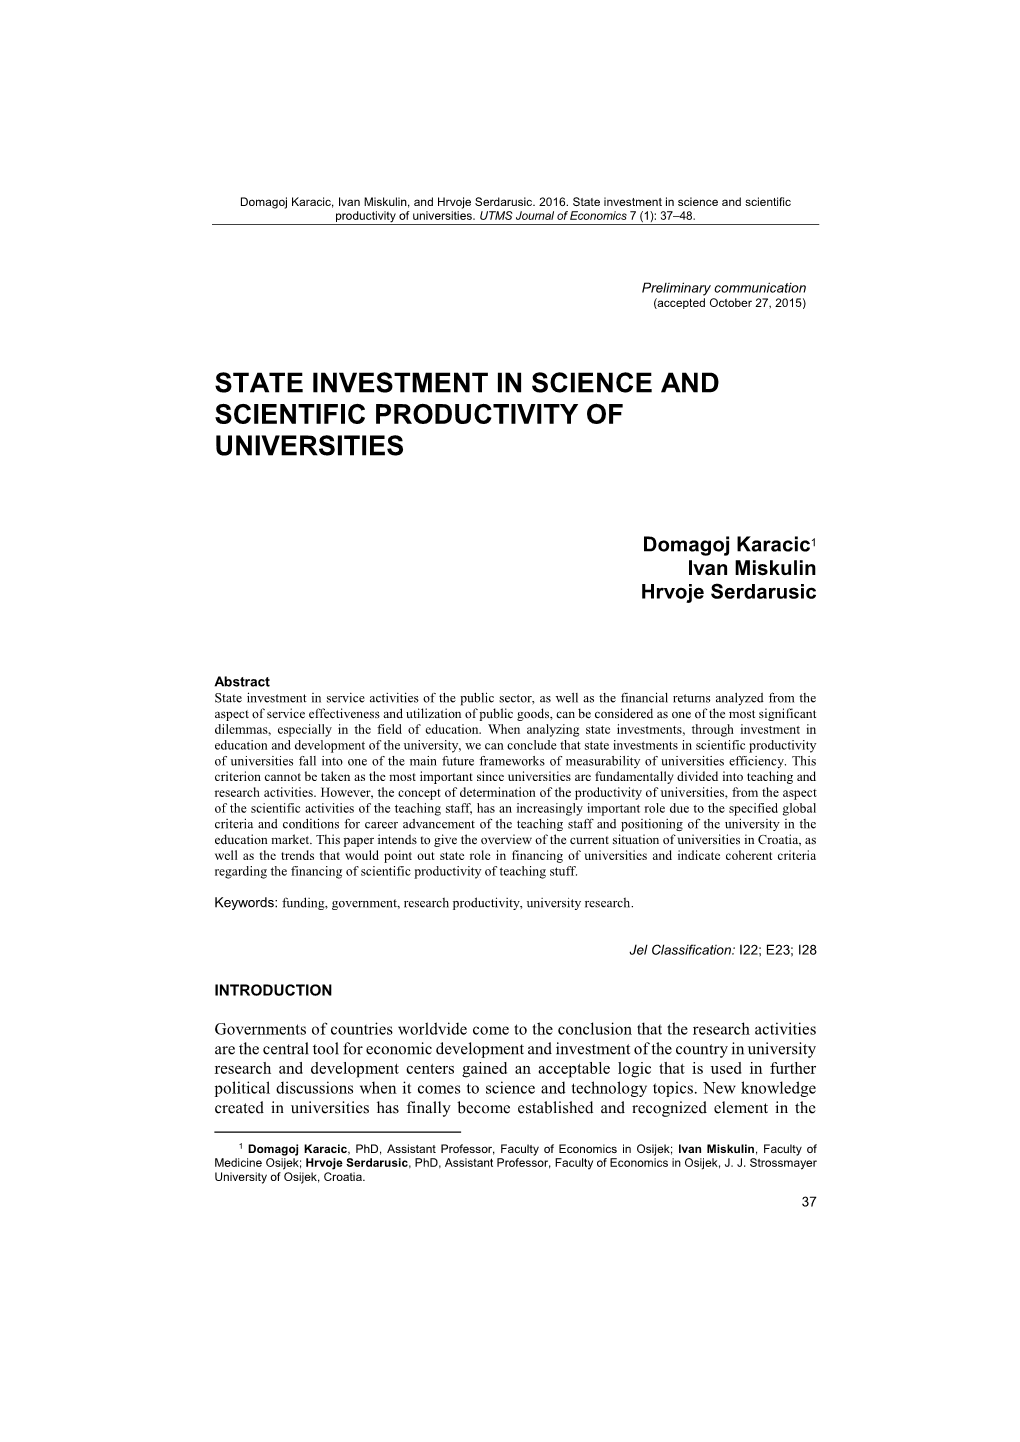 State Investment in Science and Scientific Productivity of Universities